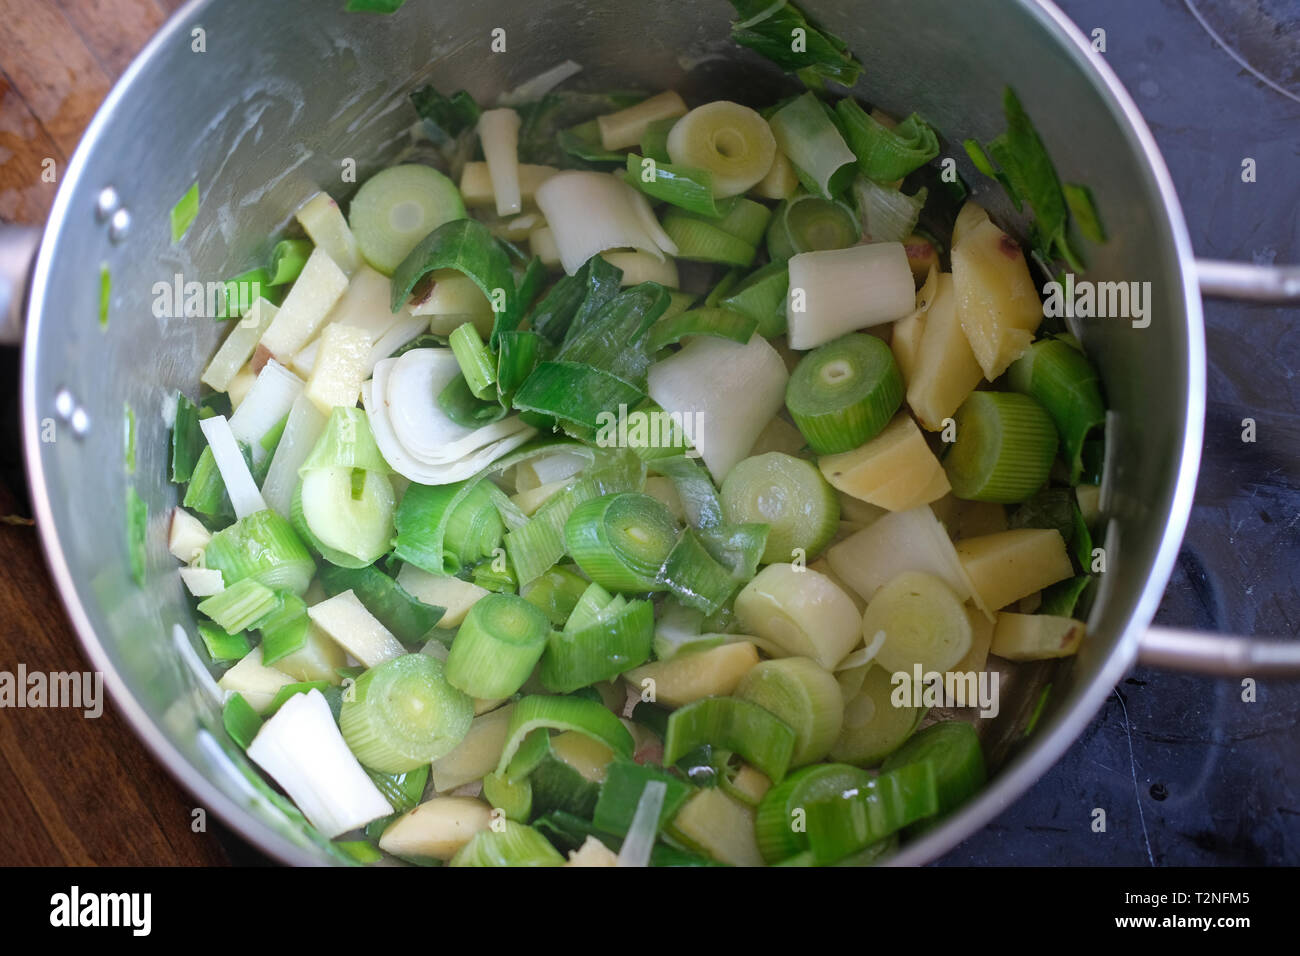 Potato and leeks cooking in a saucepan. Stock Photo